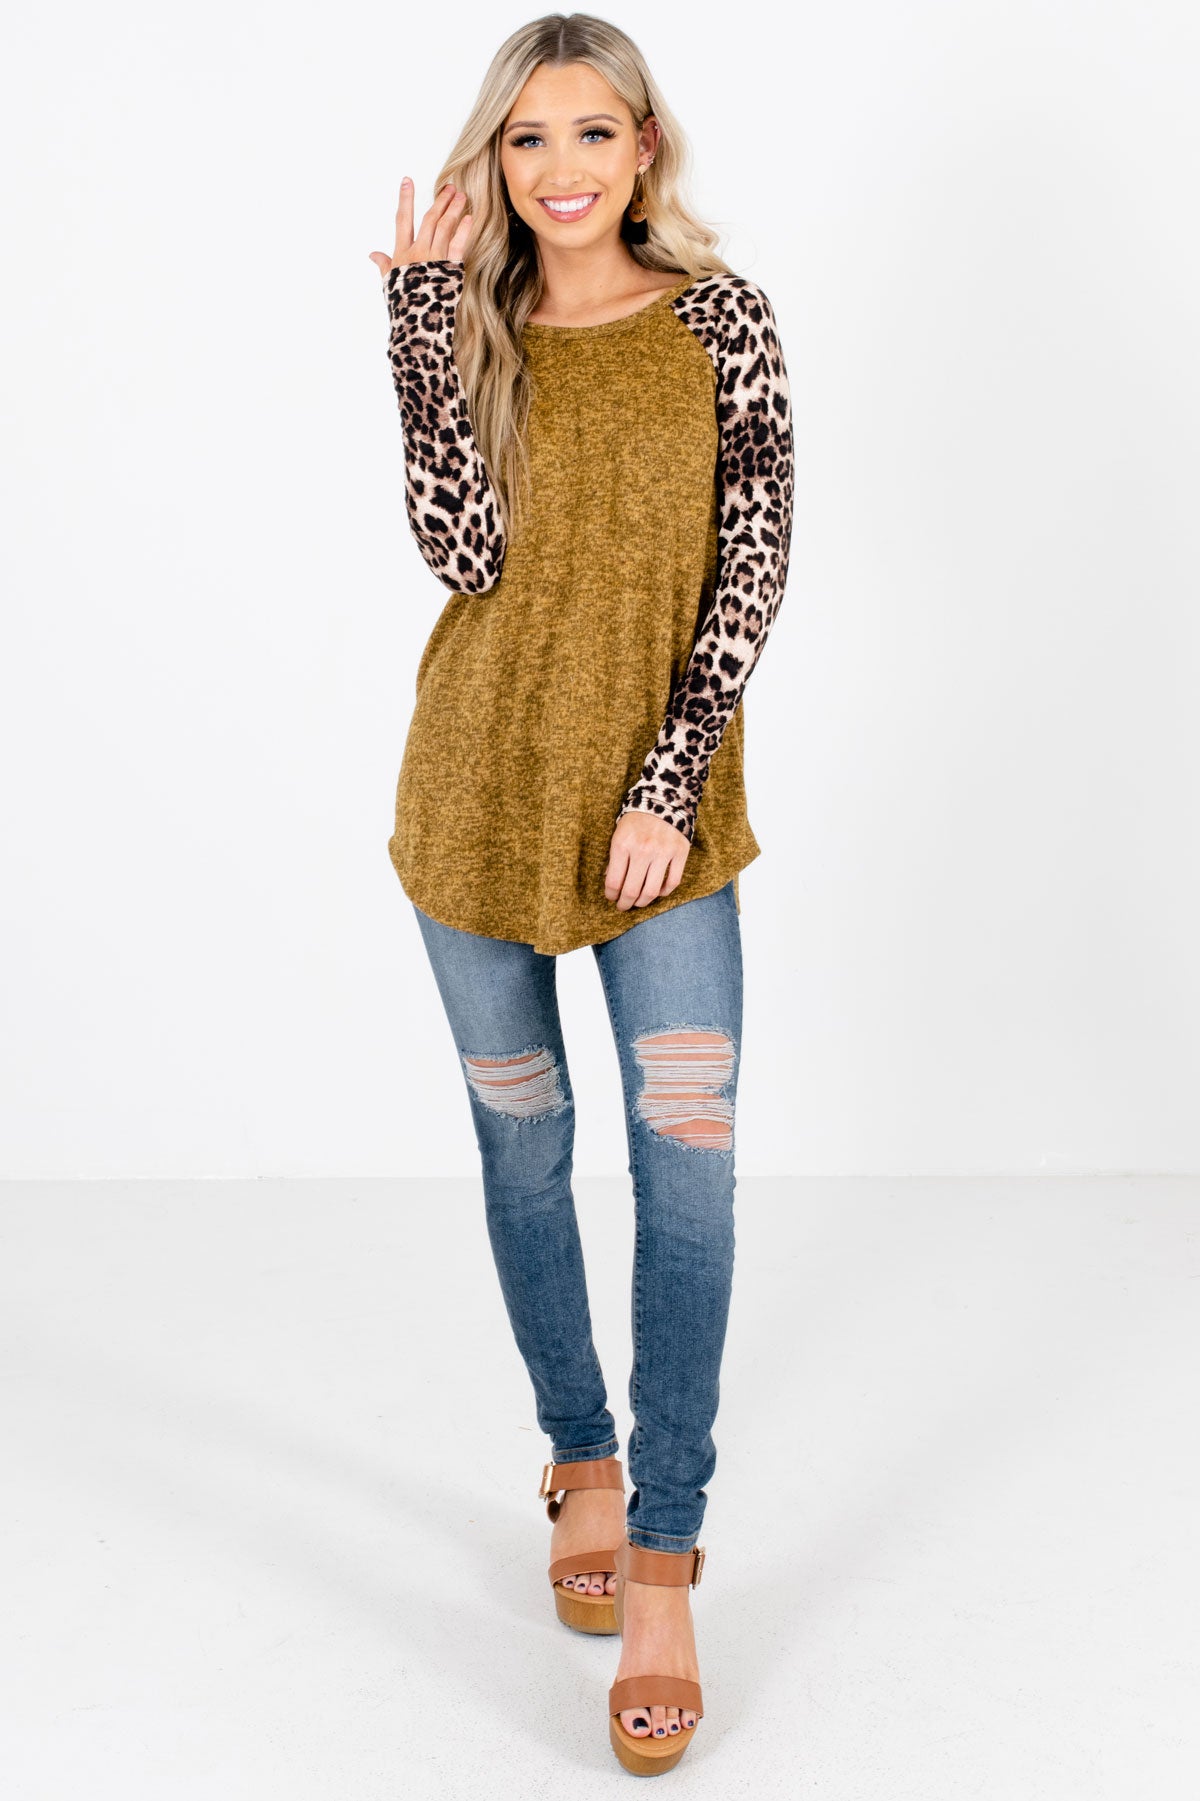 Mustard Stretchy Boutique Tops for Women